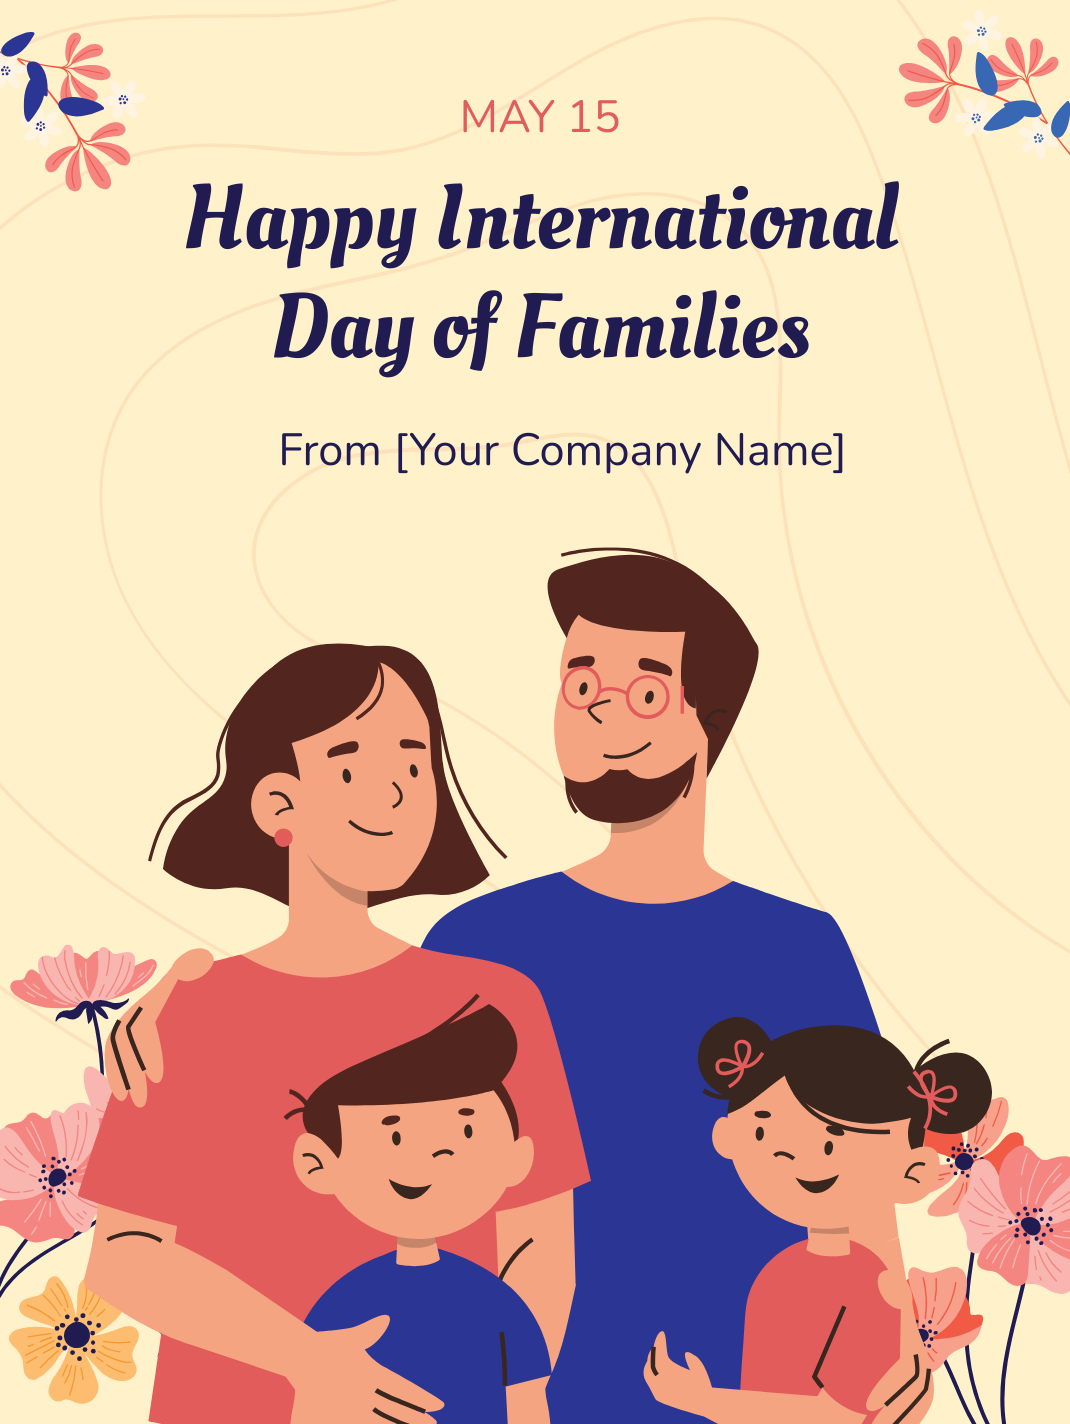 Happy International Day of Families